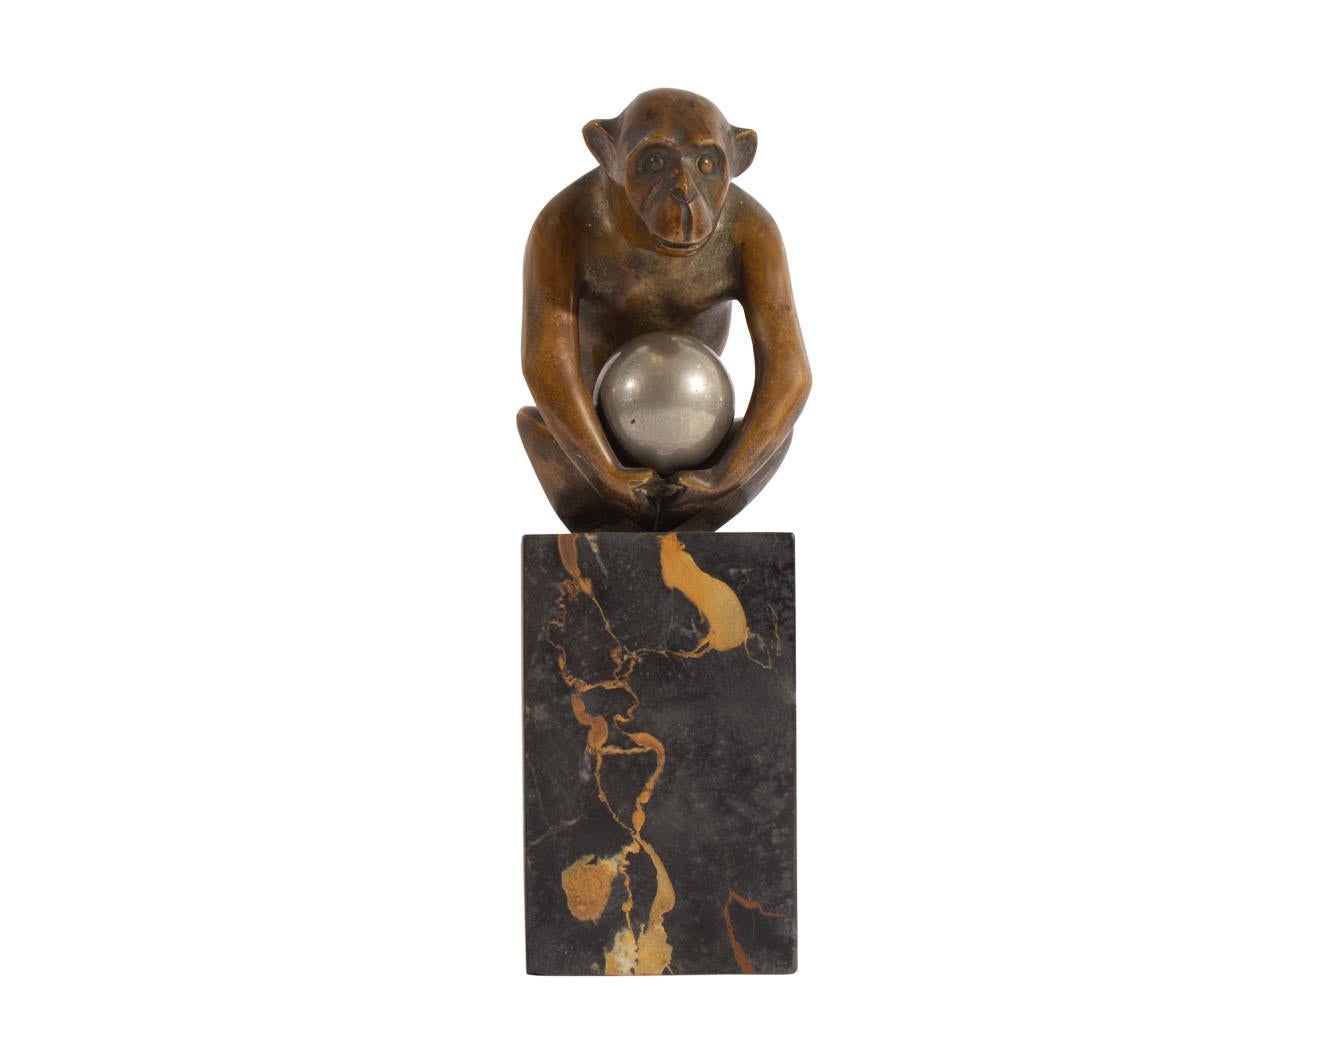 A bronze sculpture of a monkey by the French artist Georges H. Laurent (1880-1940). Signed near the bottom edge of the sculpture, the monkey is depicts seated with arms holding a silvered bronze ball. The sculpture is attached to a stone base.

